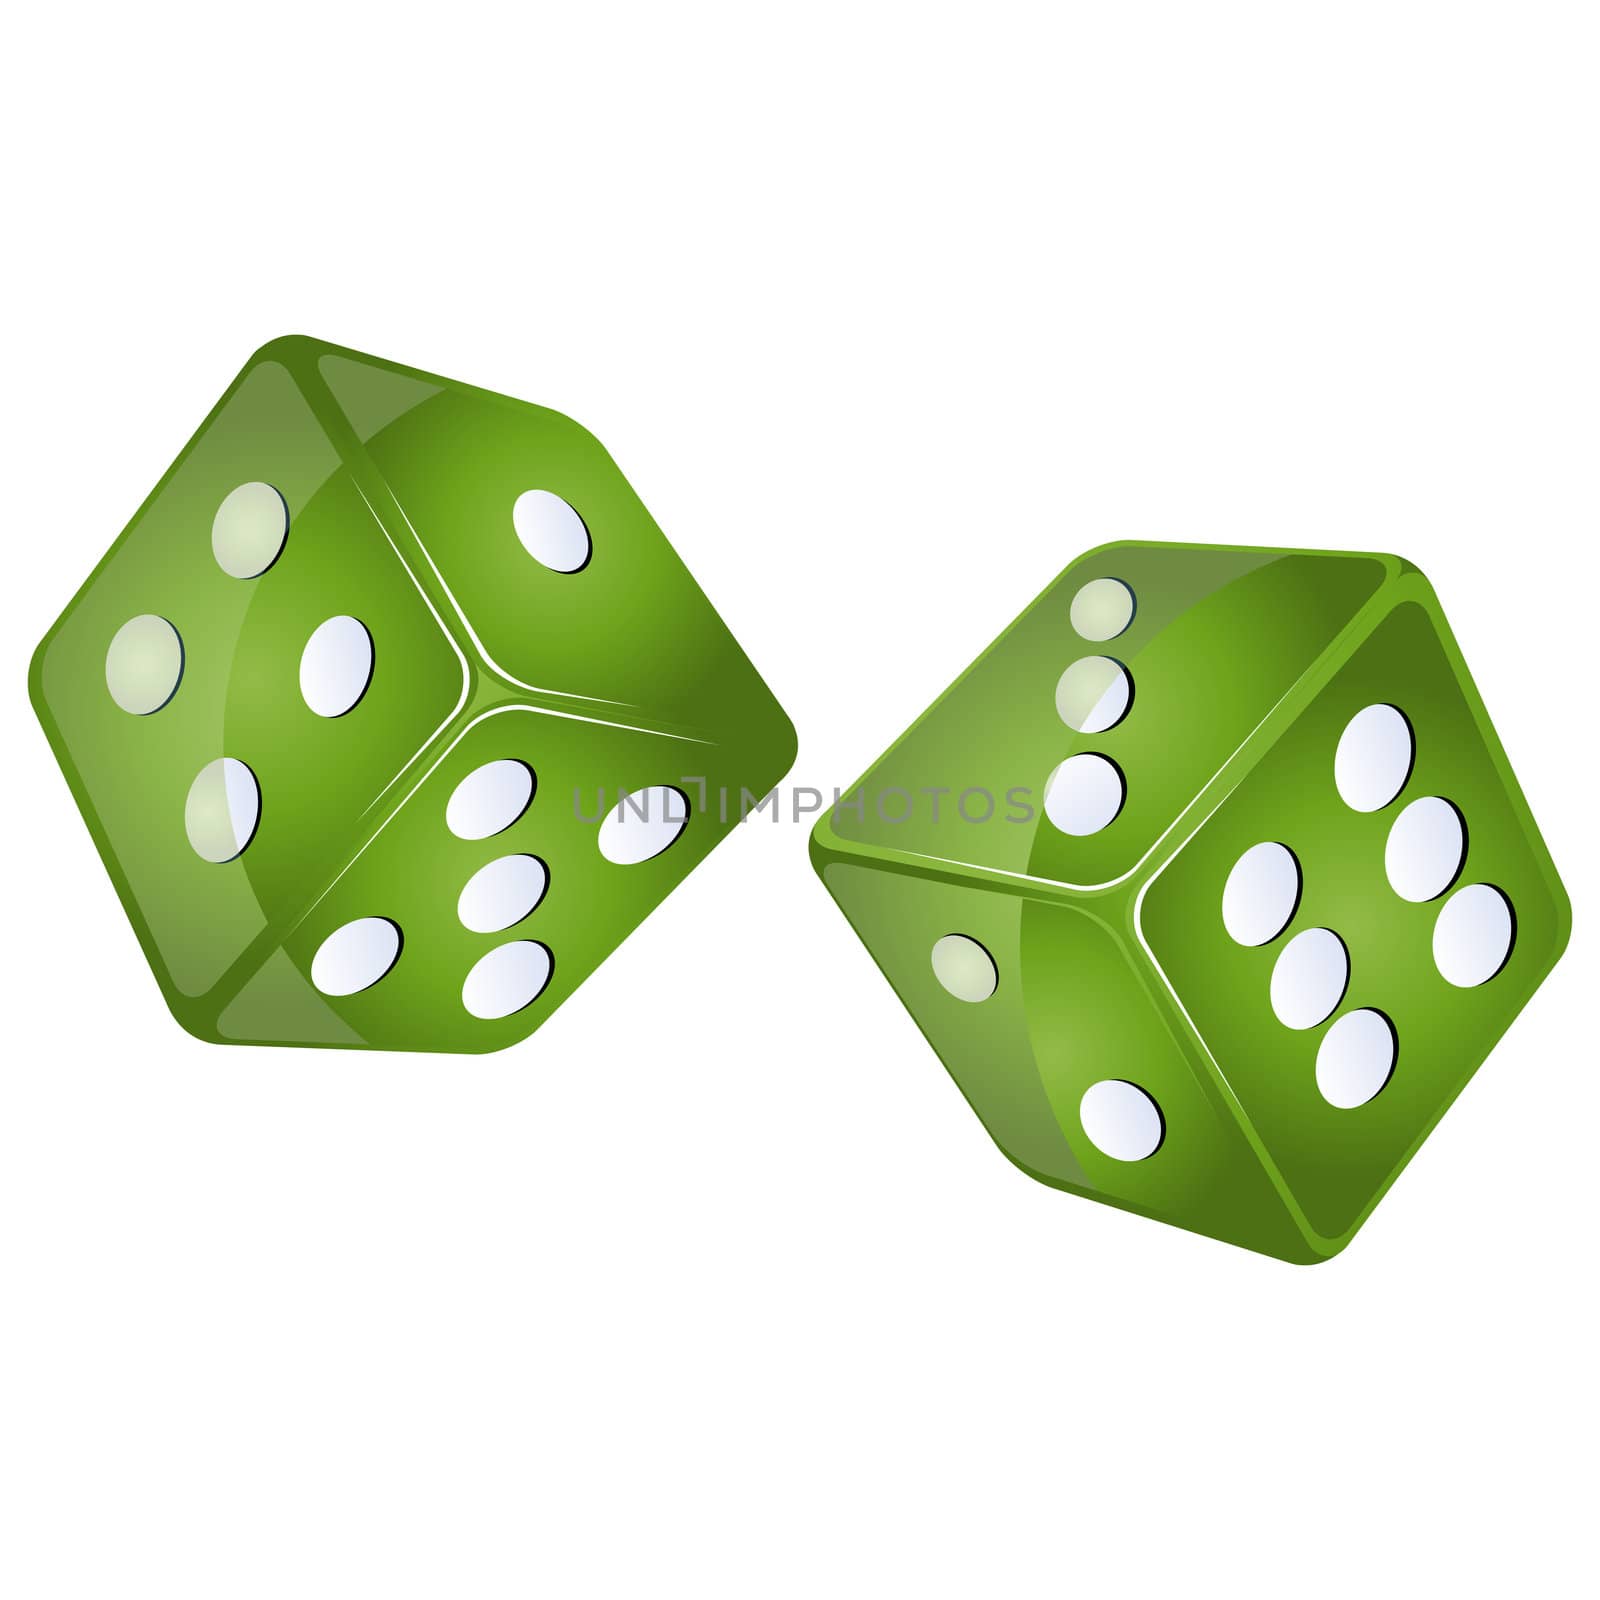 green dices by Lirch